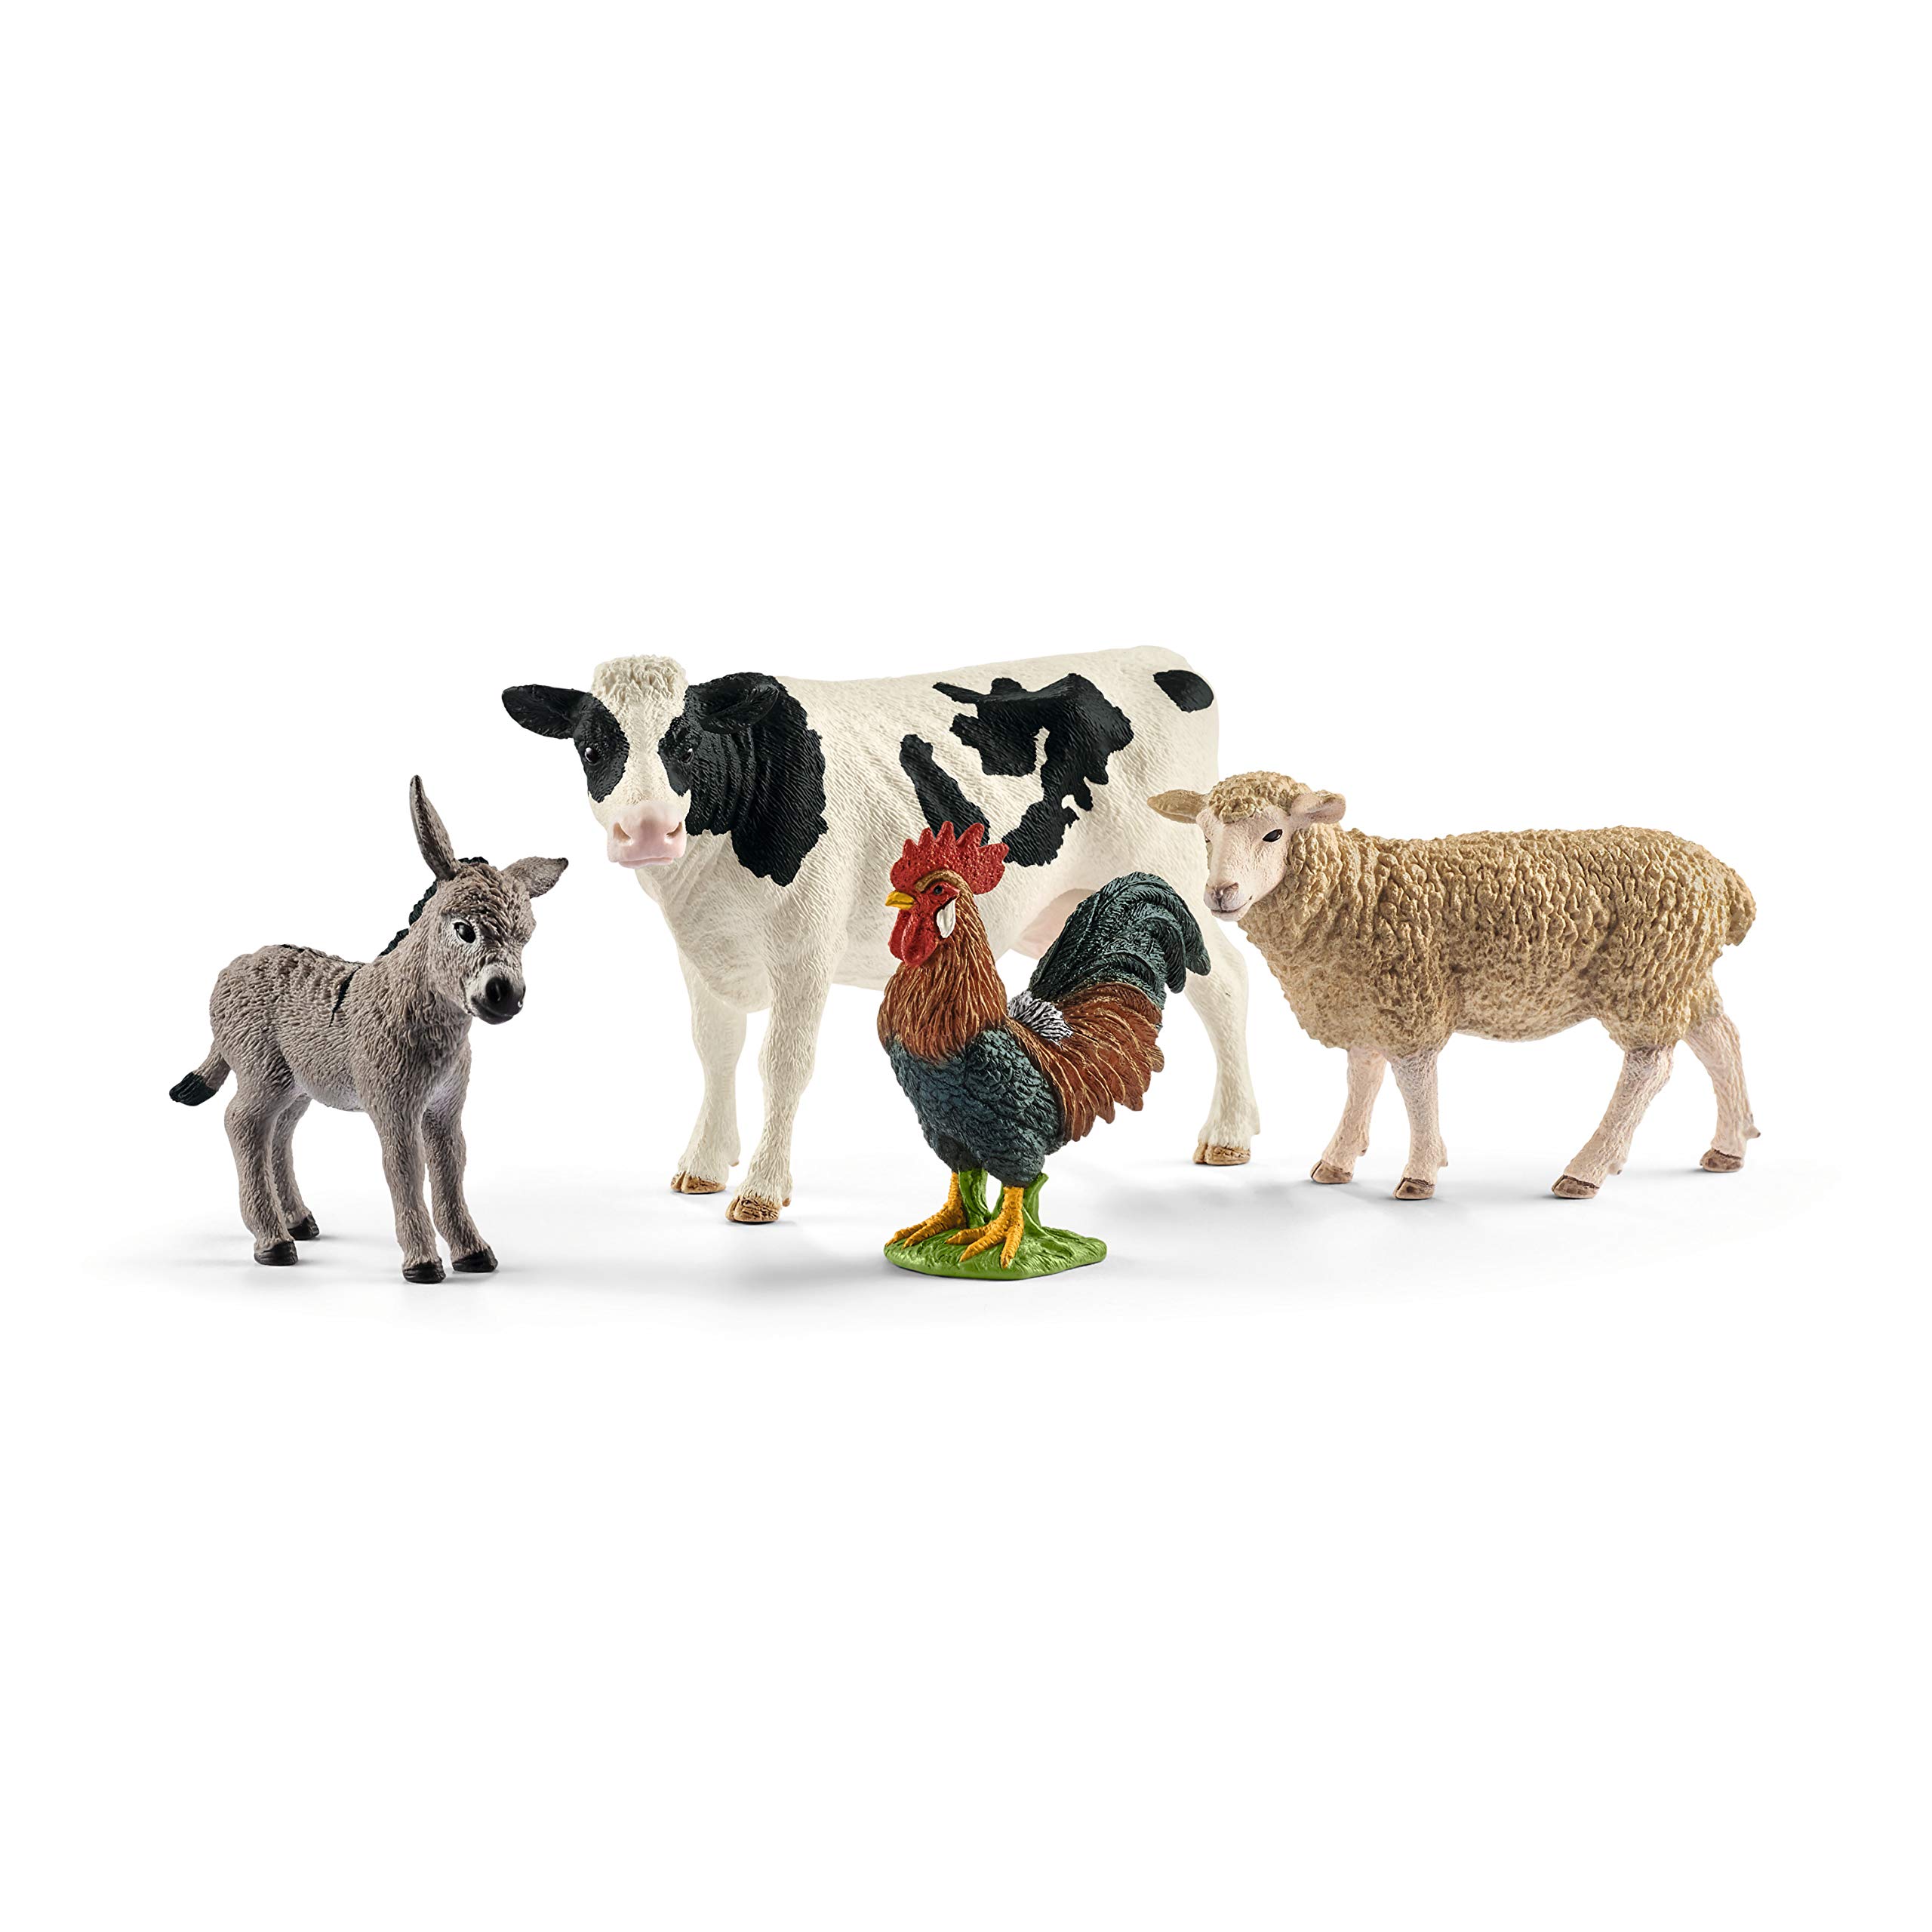 Schleich Farm World - Starter Set, Includes 4 x Collectible Toy Farm Animals, Cow, Sheep, Donkey Foal and Rooster Farm Animal Toys for Kids Ages 3+